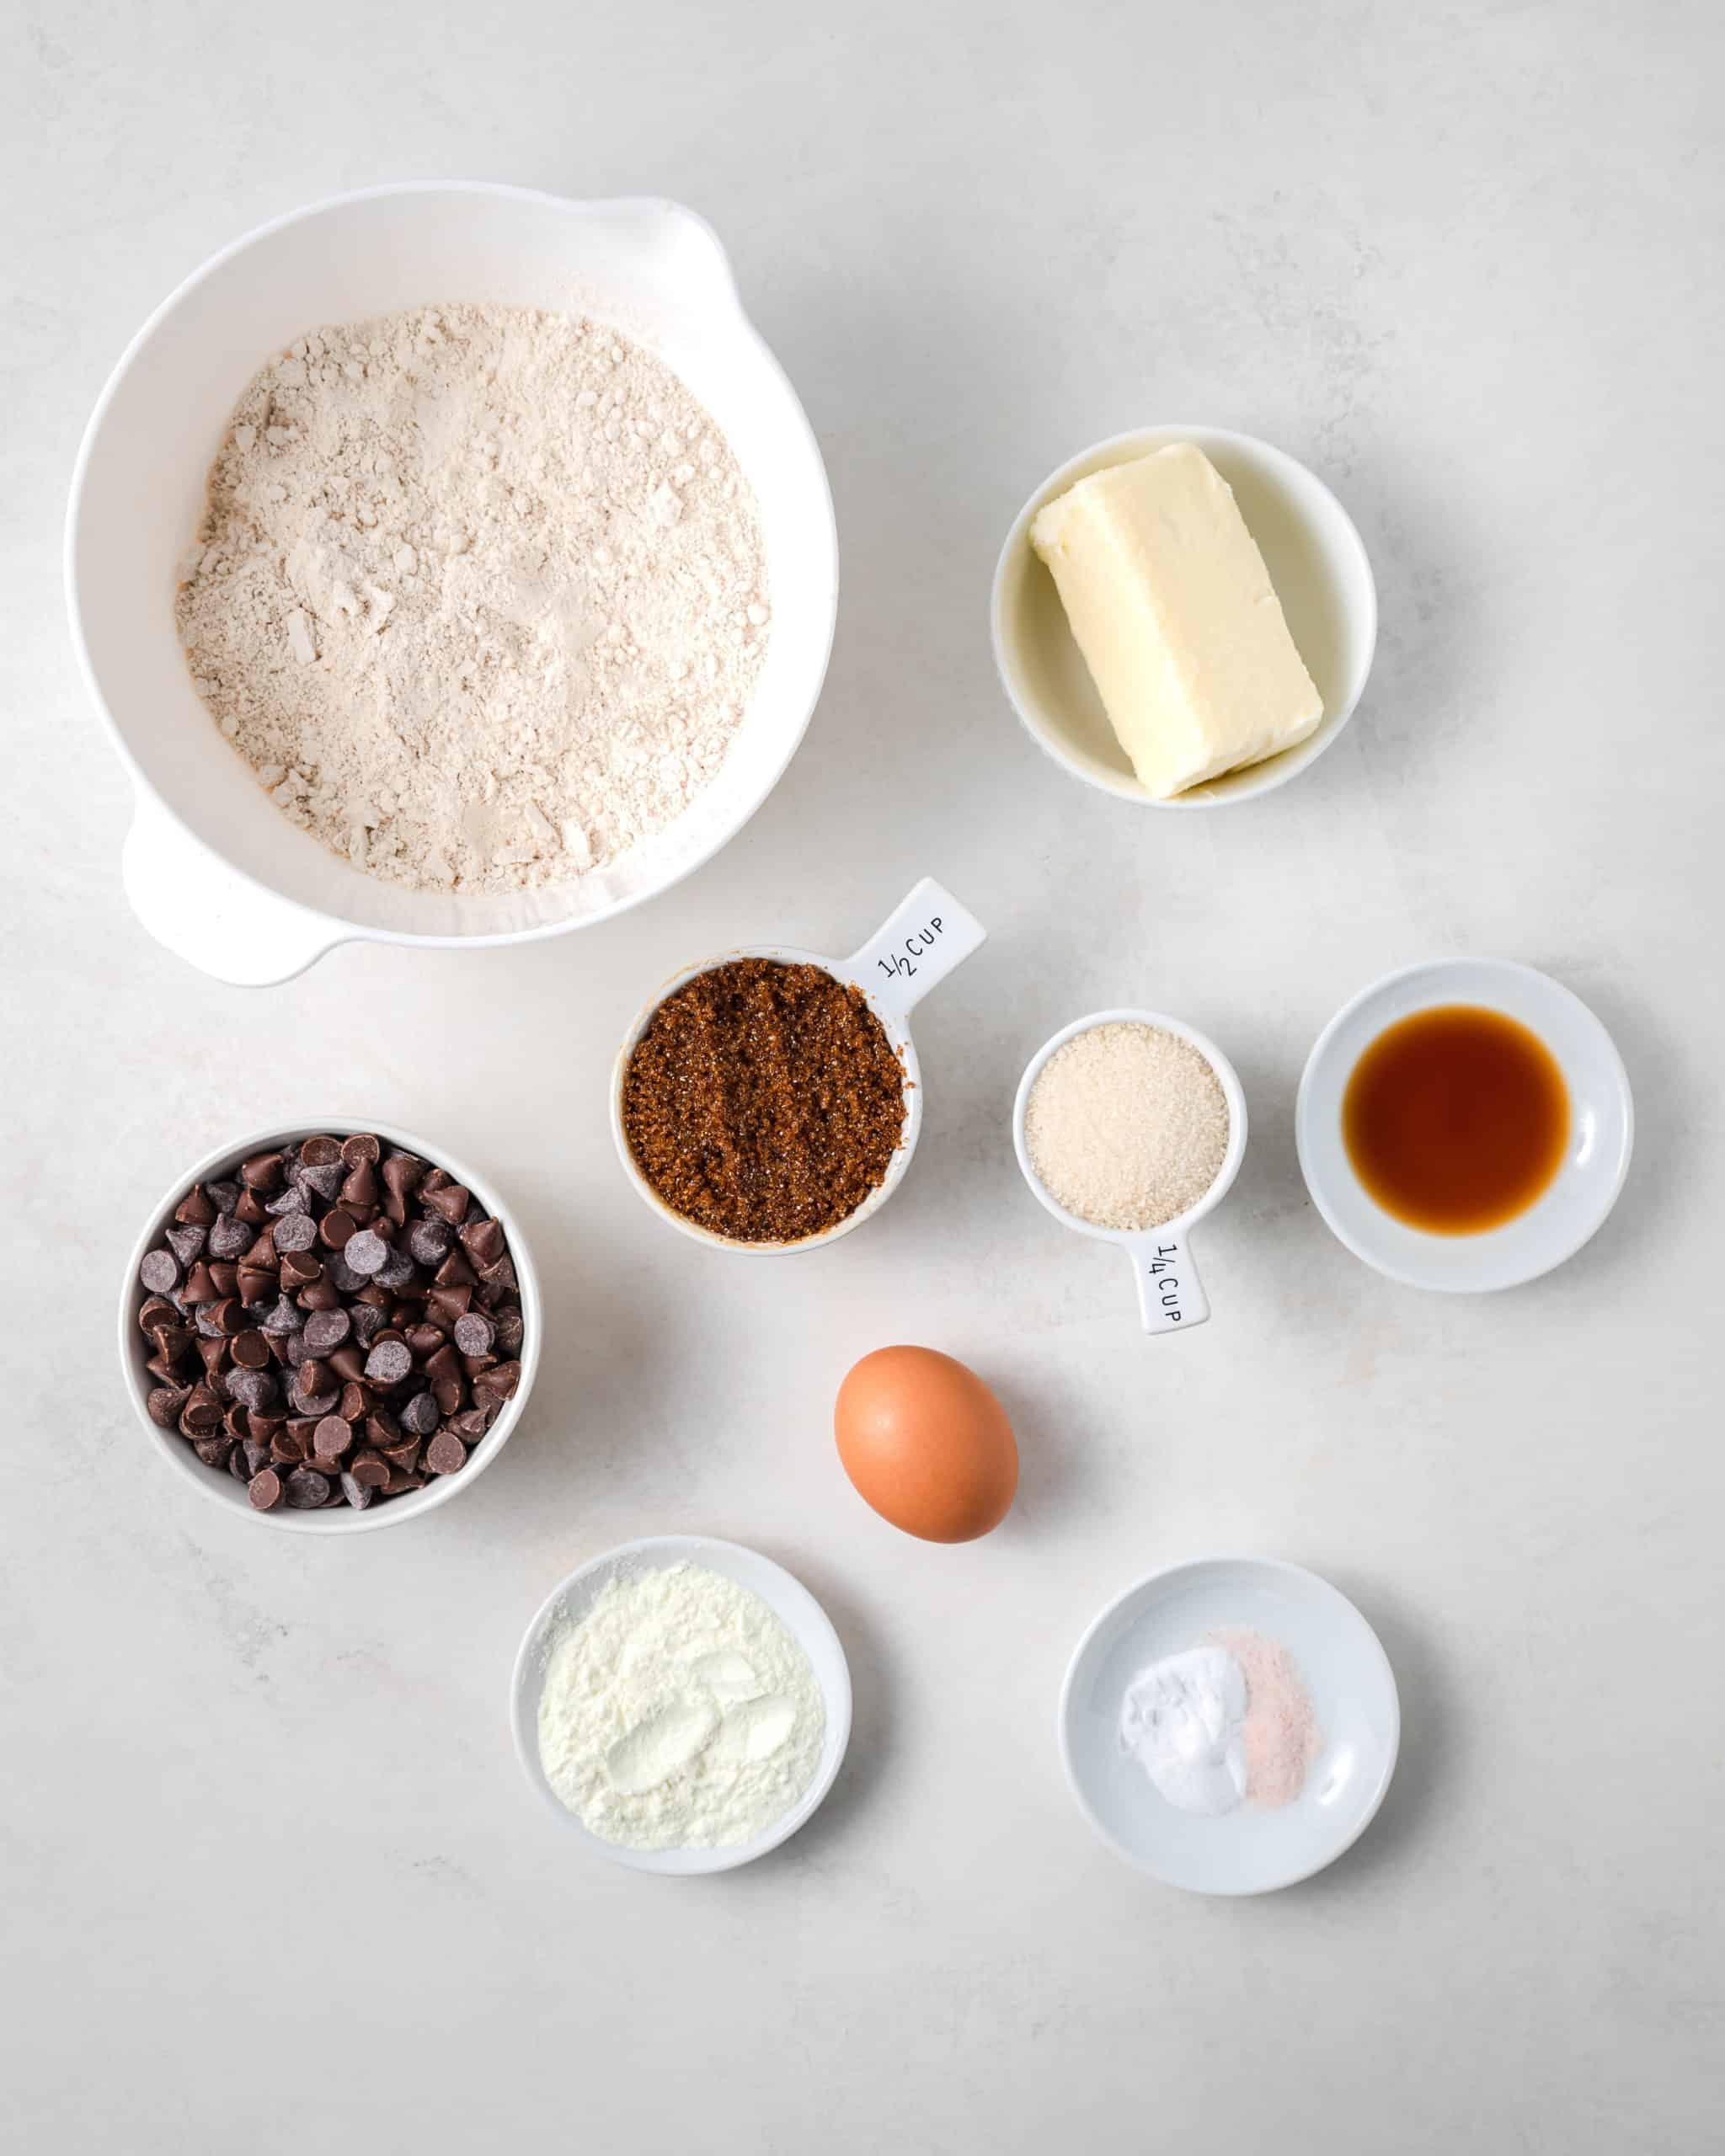 Oat Flour Chocolate Chip Cookie Ingredients